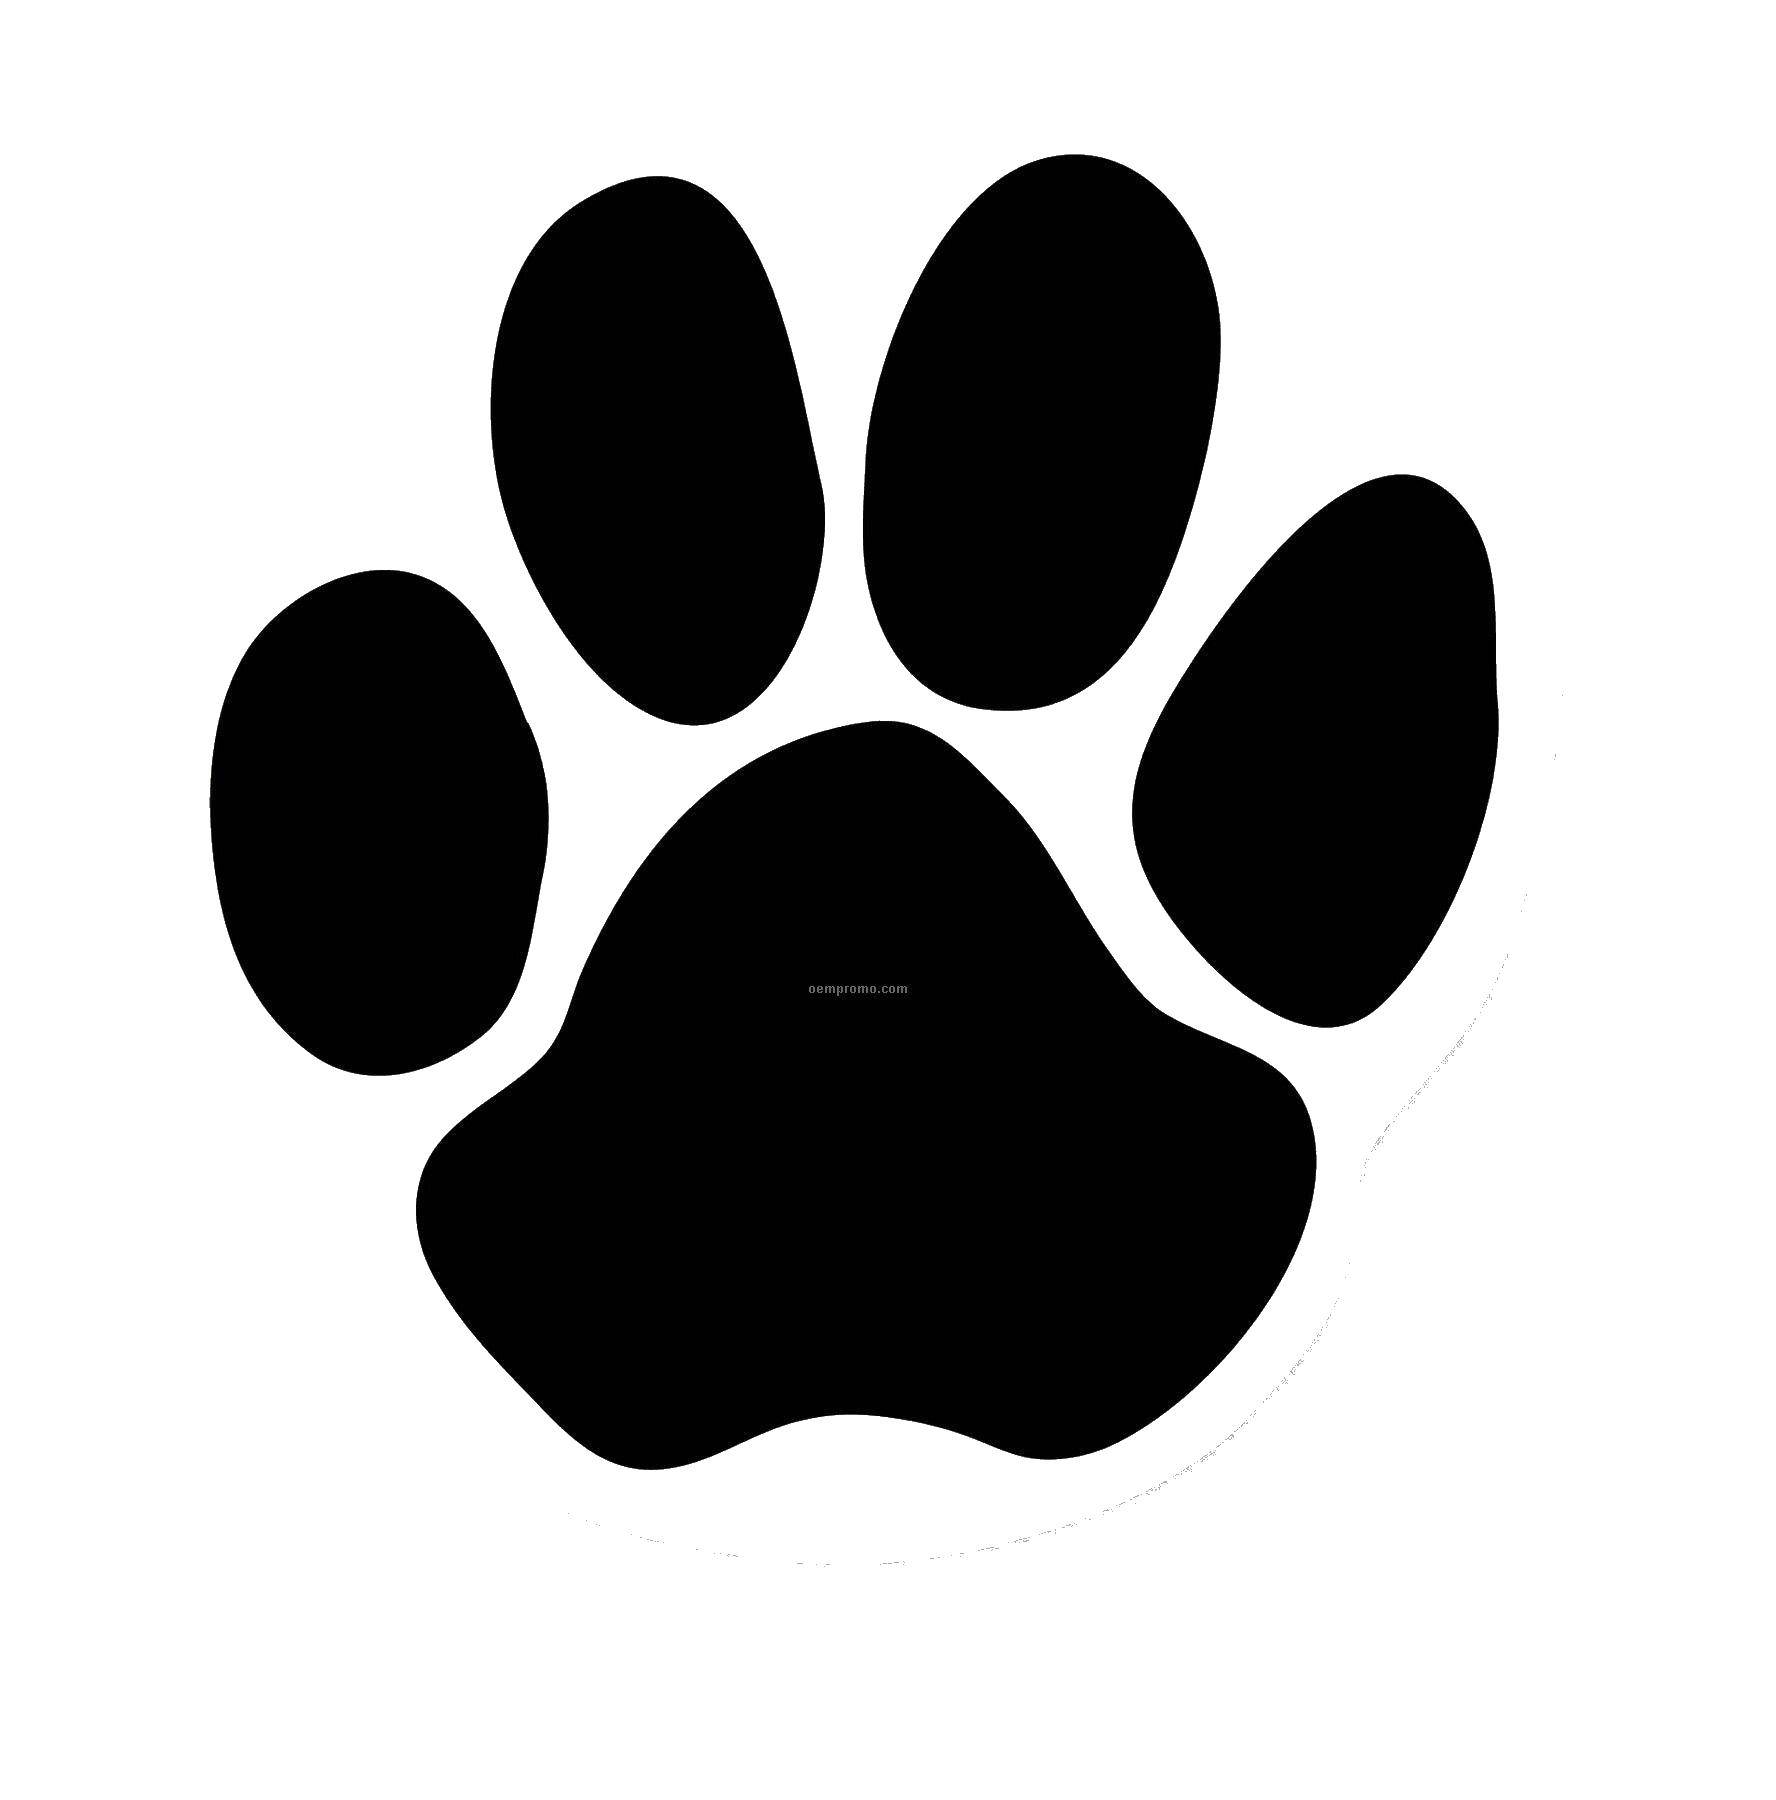 Coloring Trail dog. Category Animal tracks. Tags:  footprints, animals, dog.